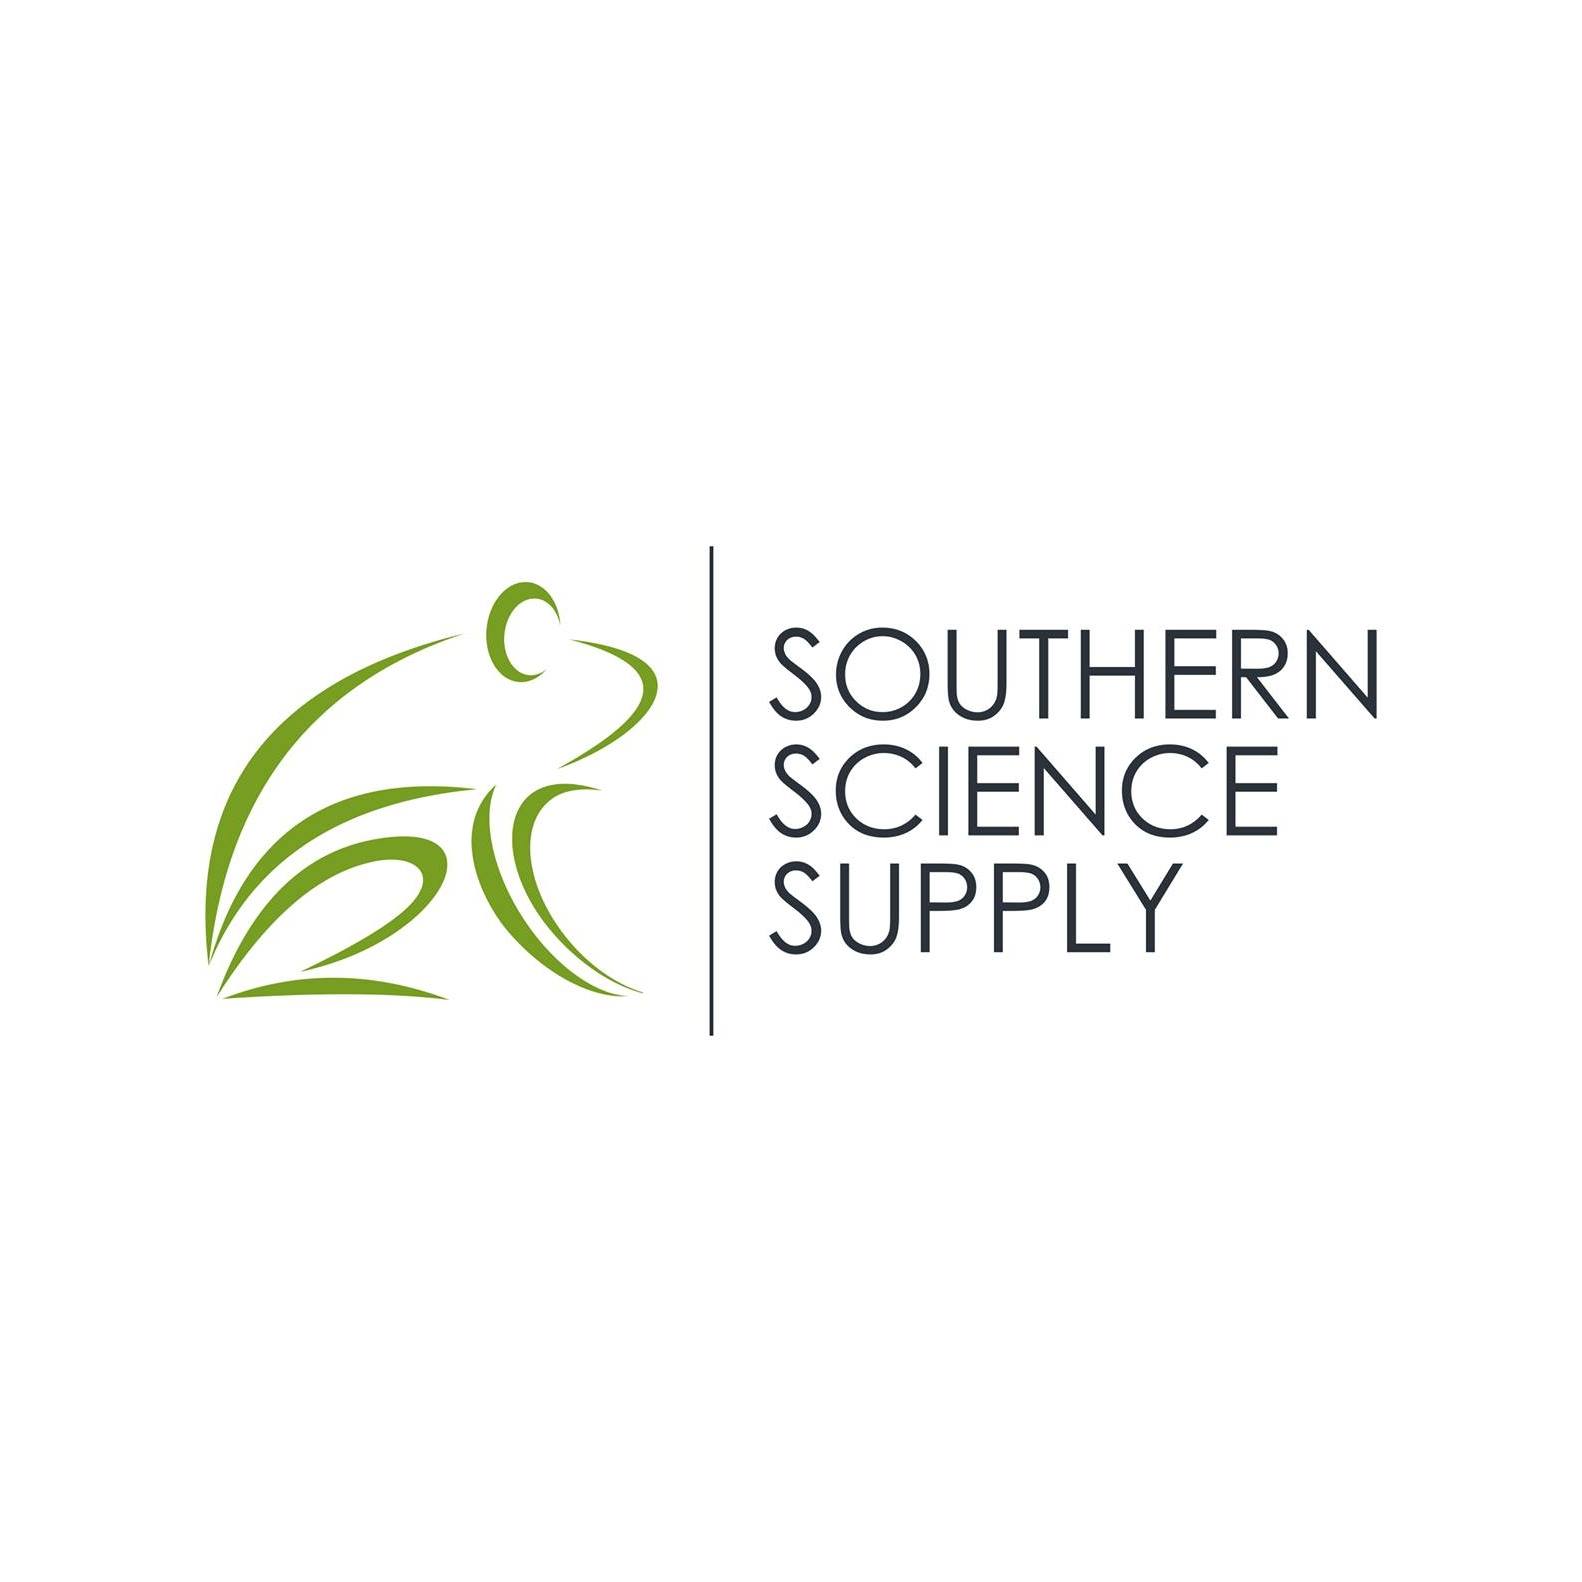 Southern Science Supply